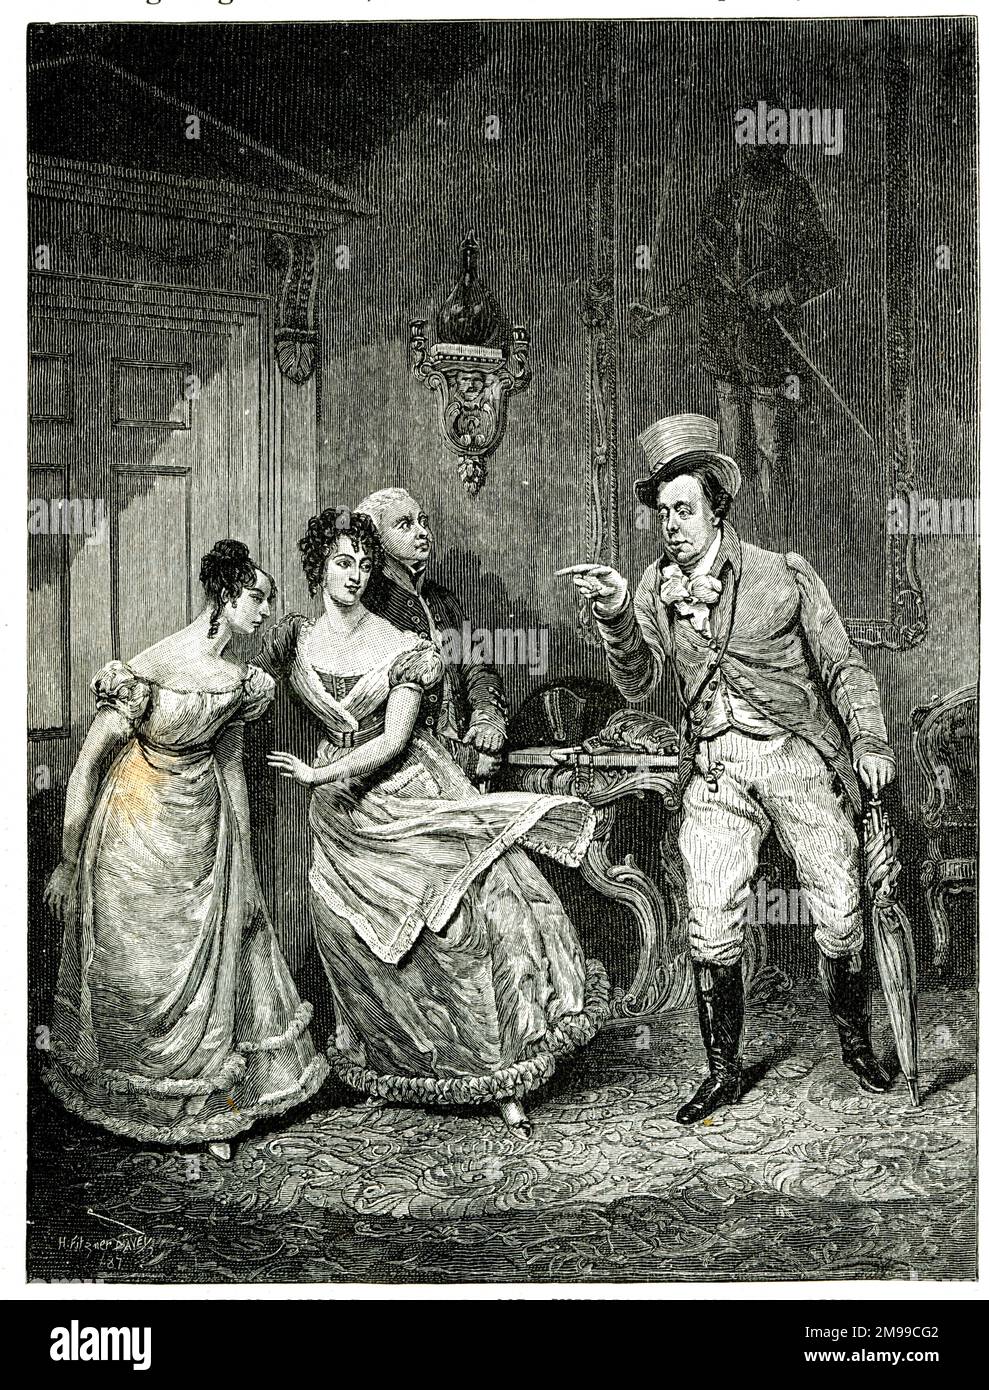 Madame Vestris, Miss P Glover, Mr Williams and John Liston in the popular comedy by John Poole, Paul Pry, which premiered at the Haymarket Theatre, London, in 1825. Stock Photo